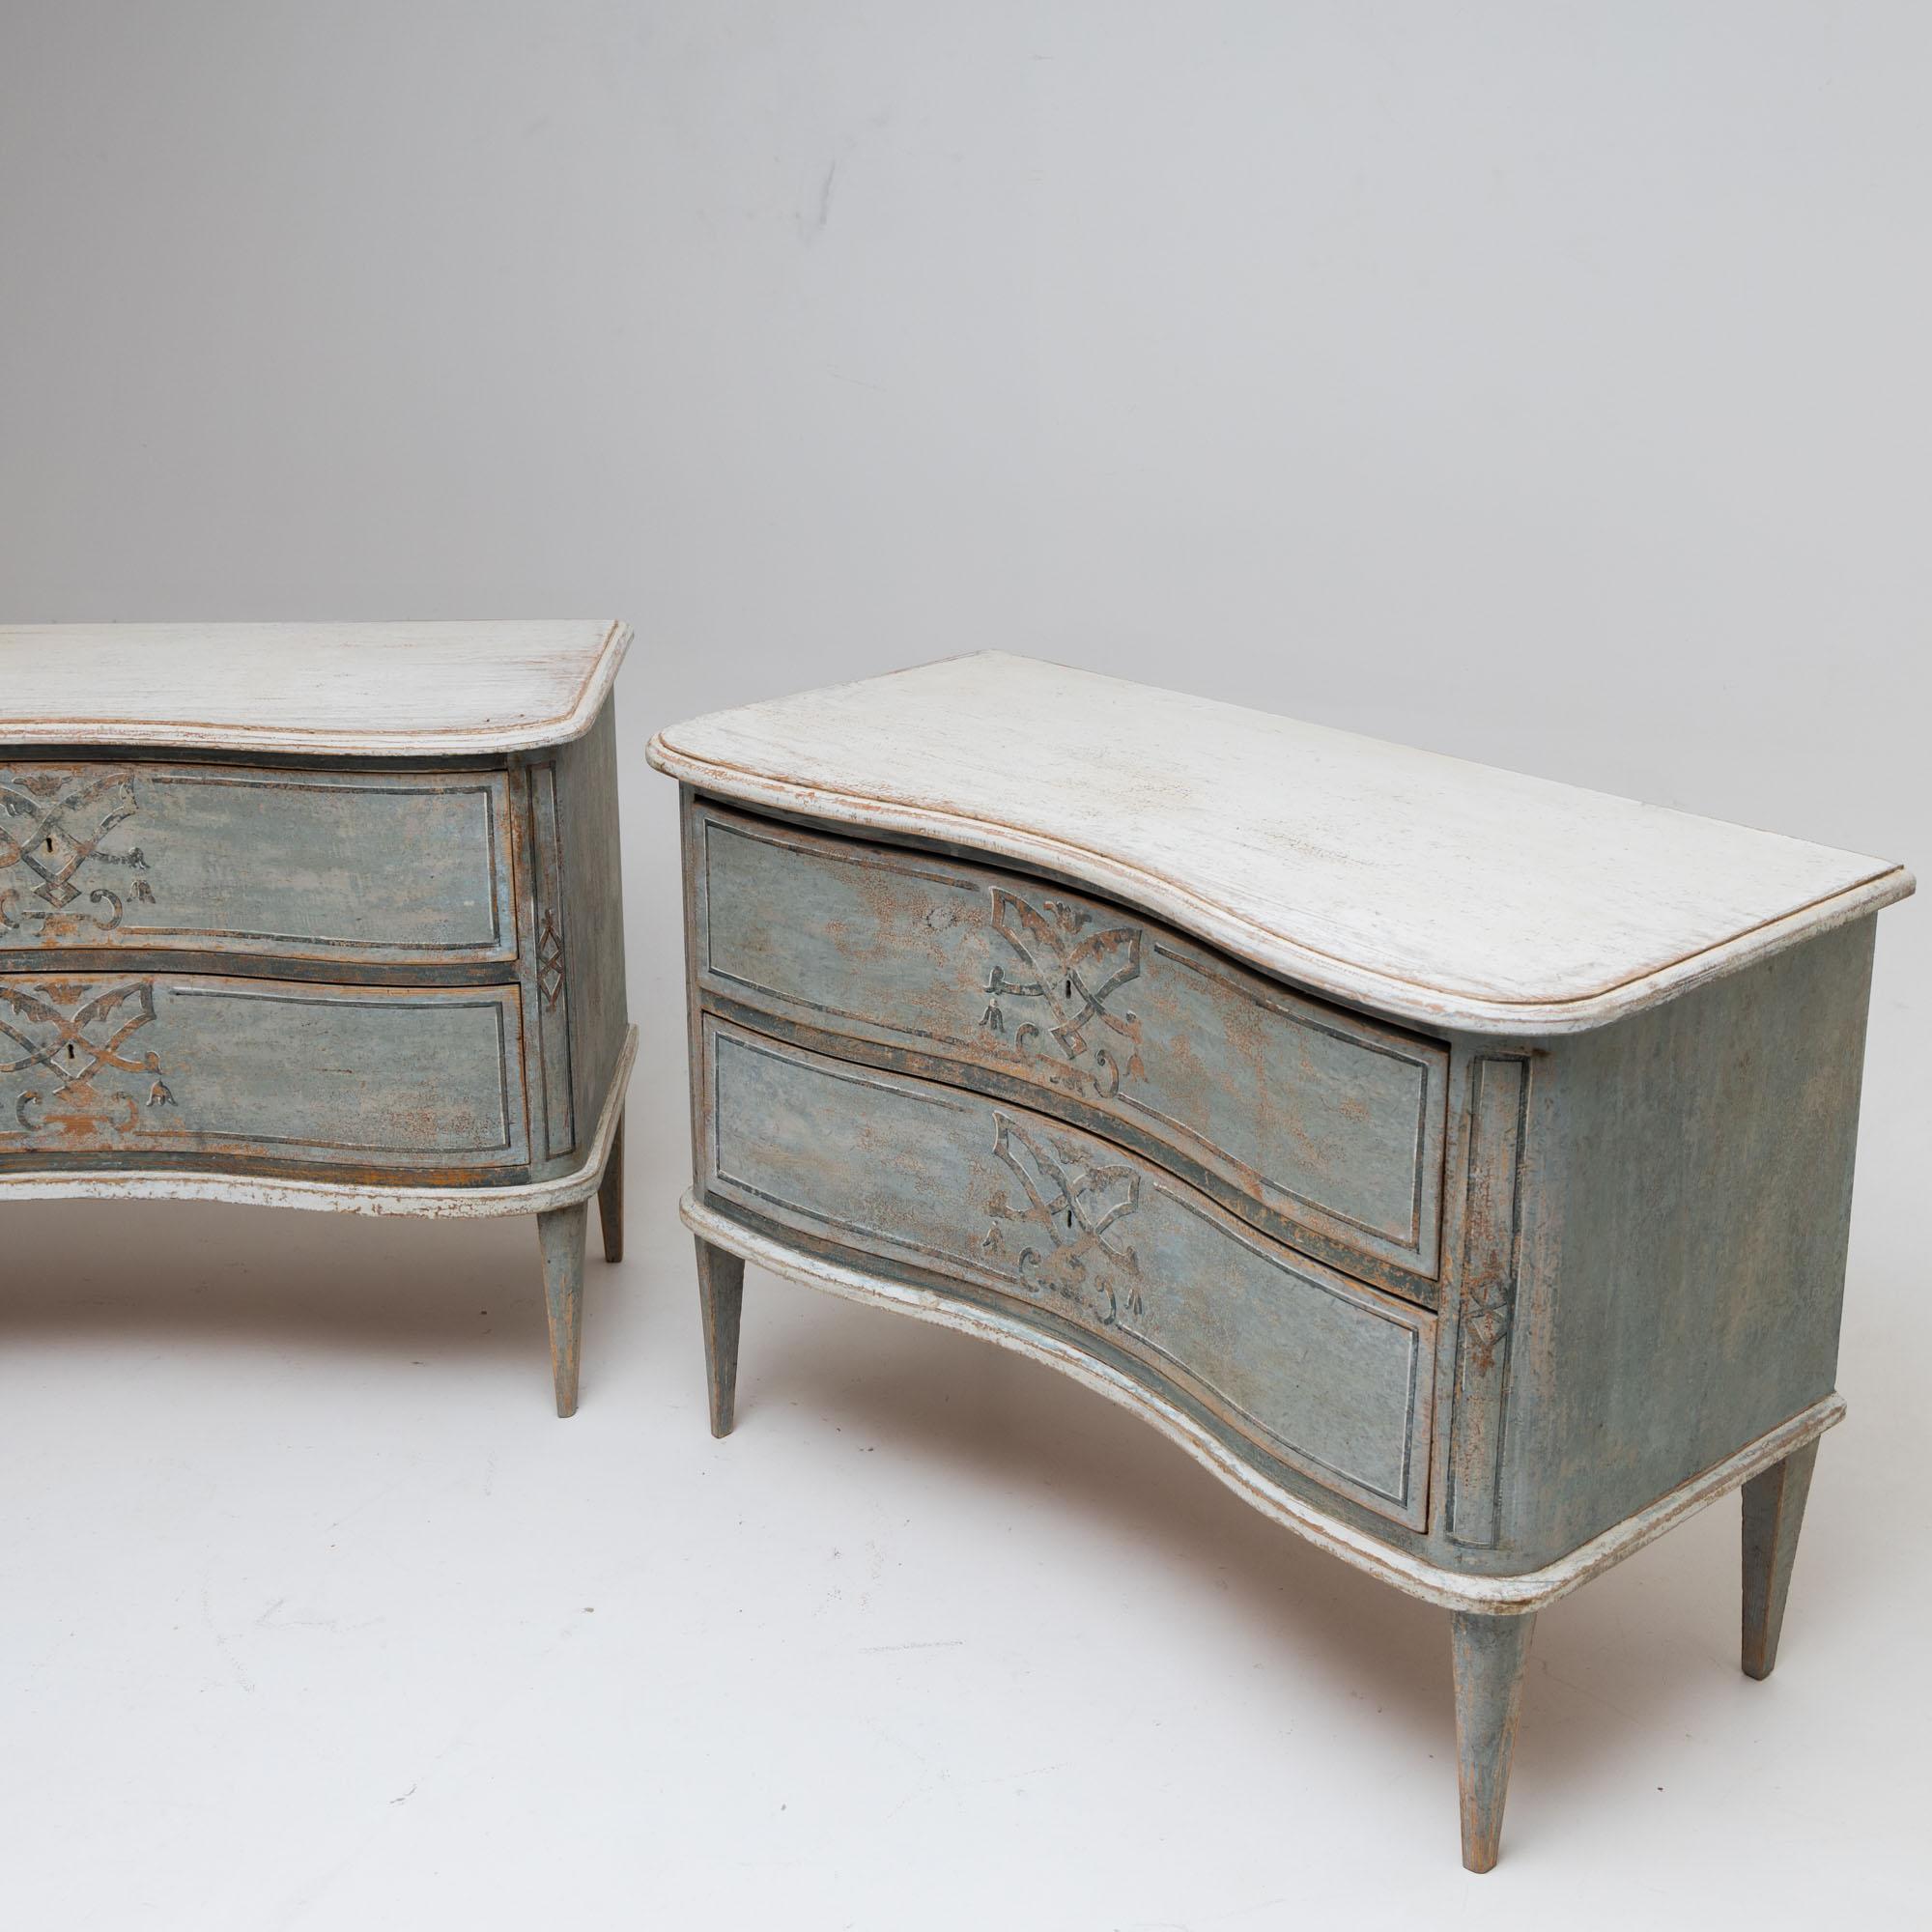 Hand-Painted Pair of Painted Chests of Drawers, Denmark, Late 19th Century